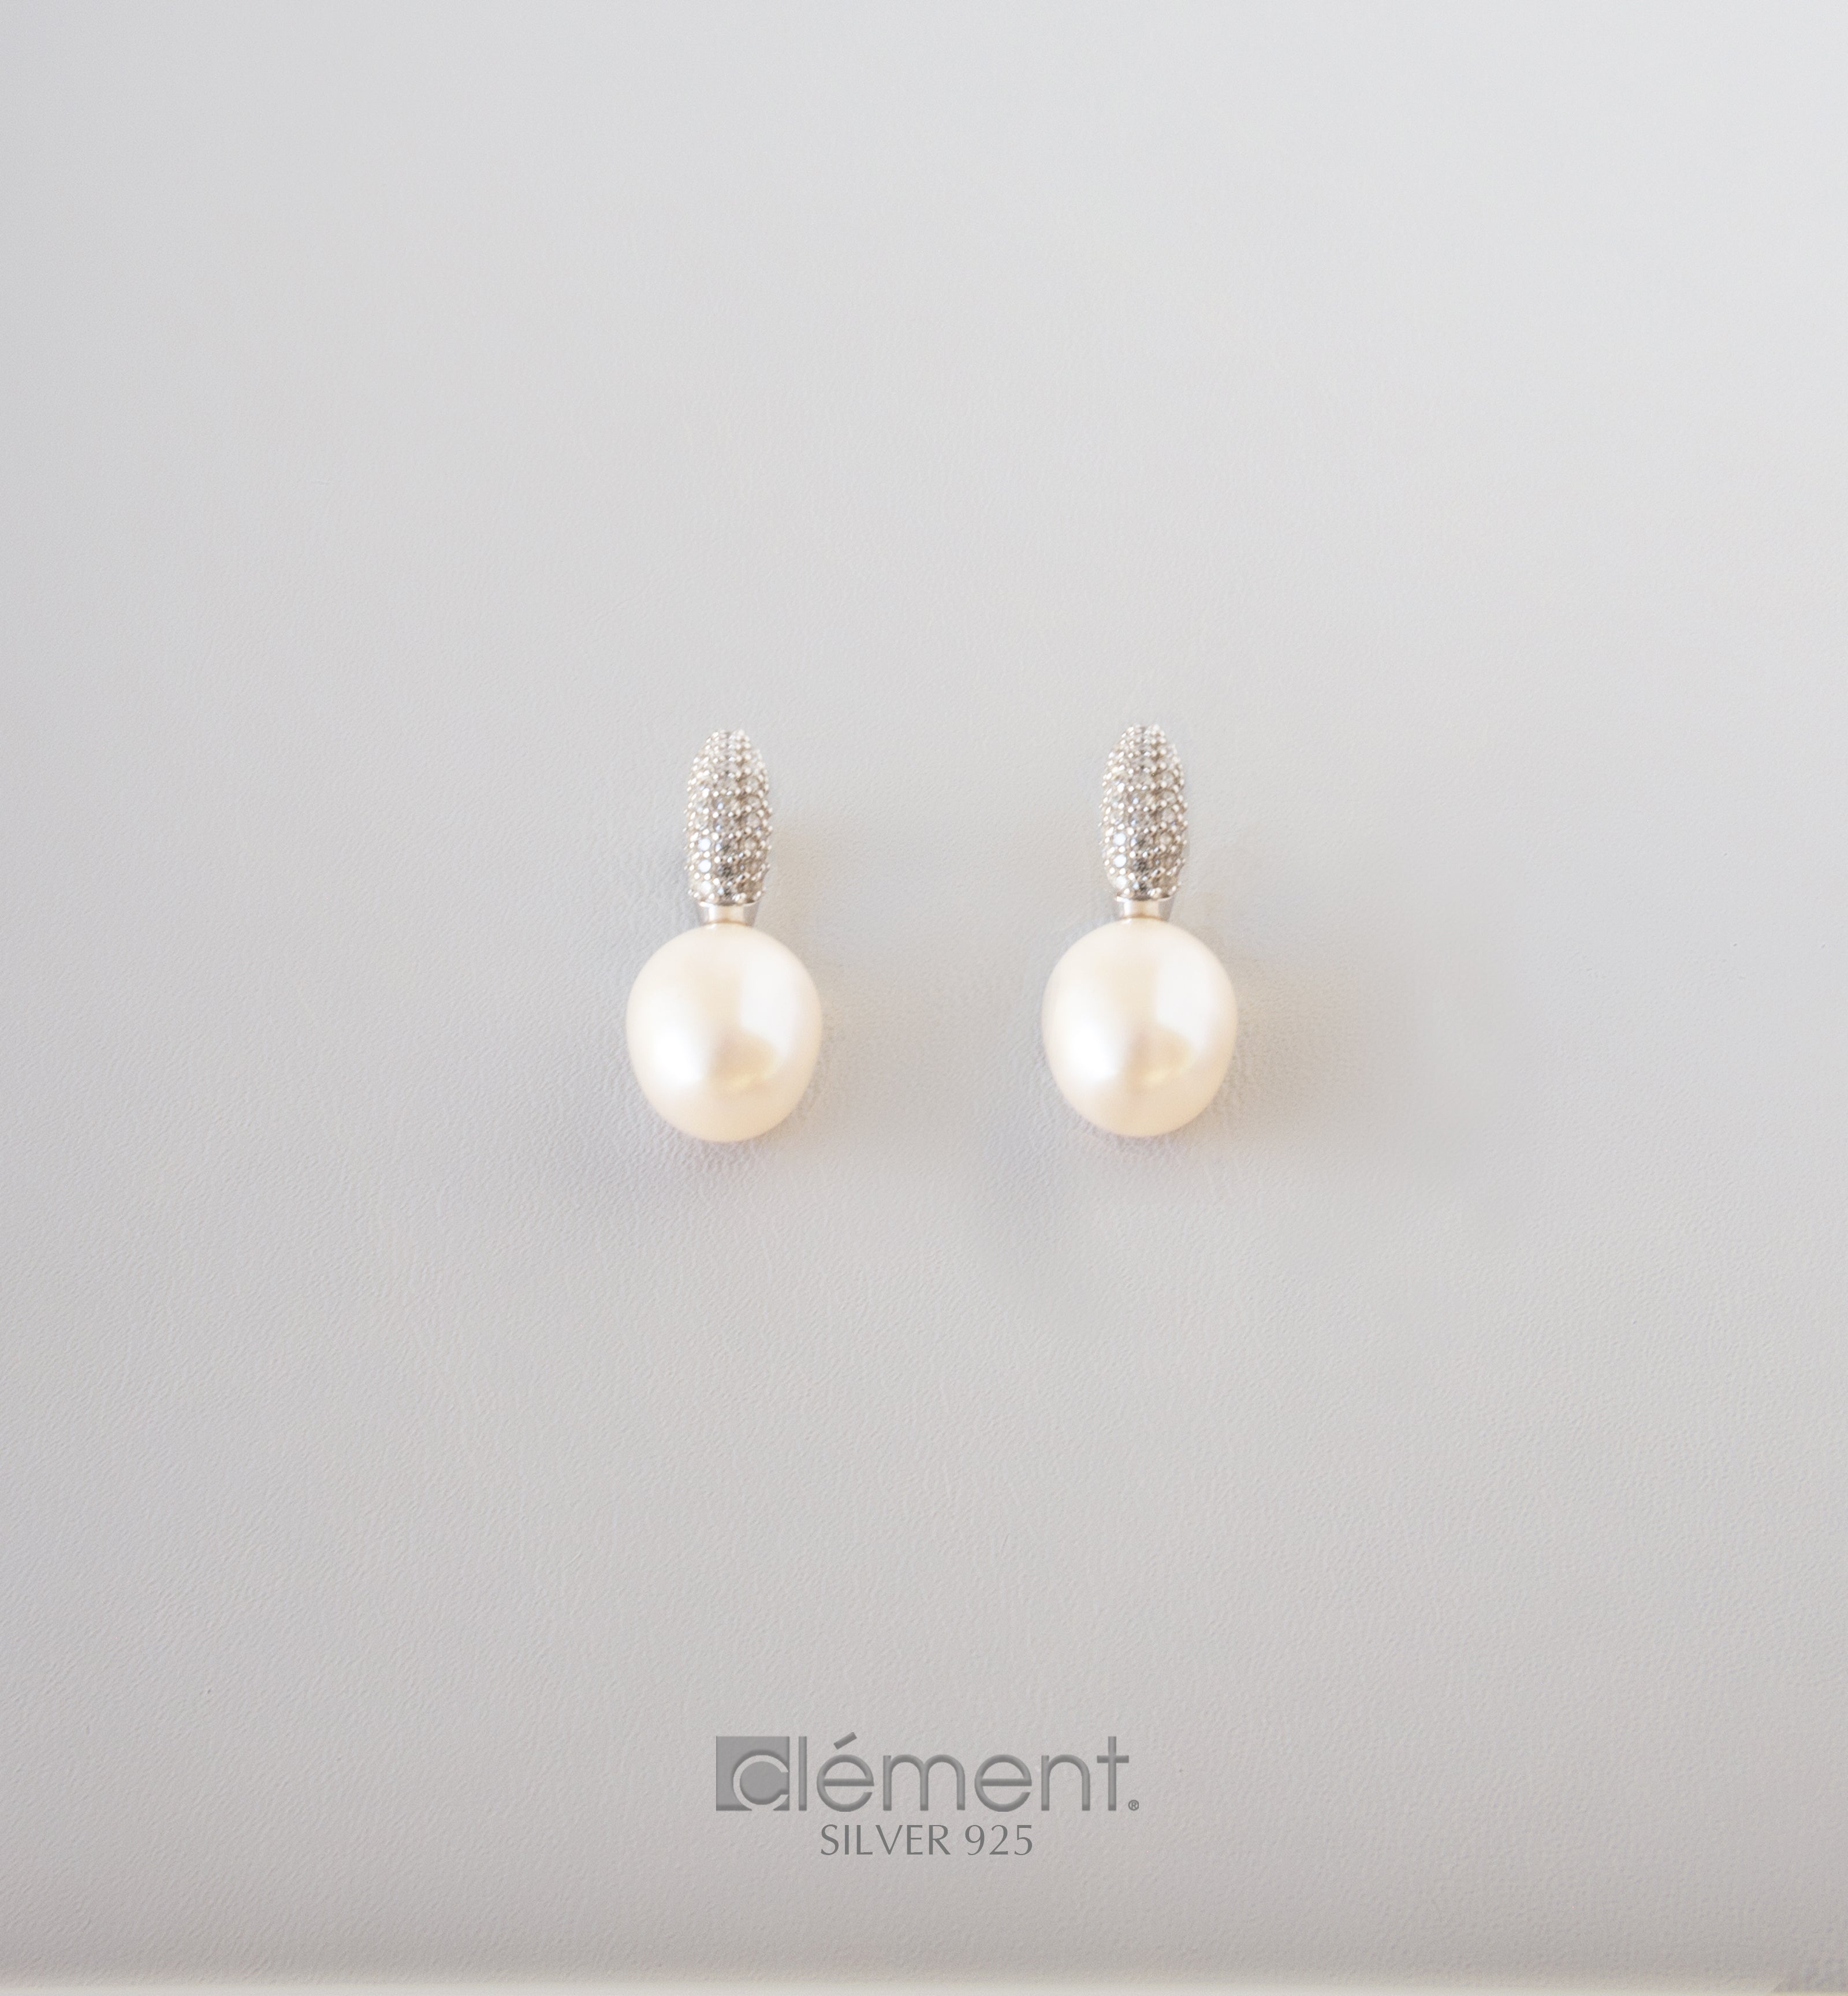 Silver 925 Pearl Earrings with CZ Stones